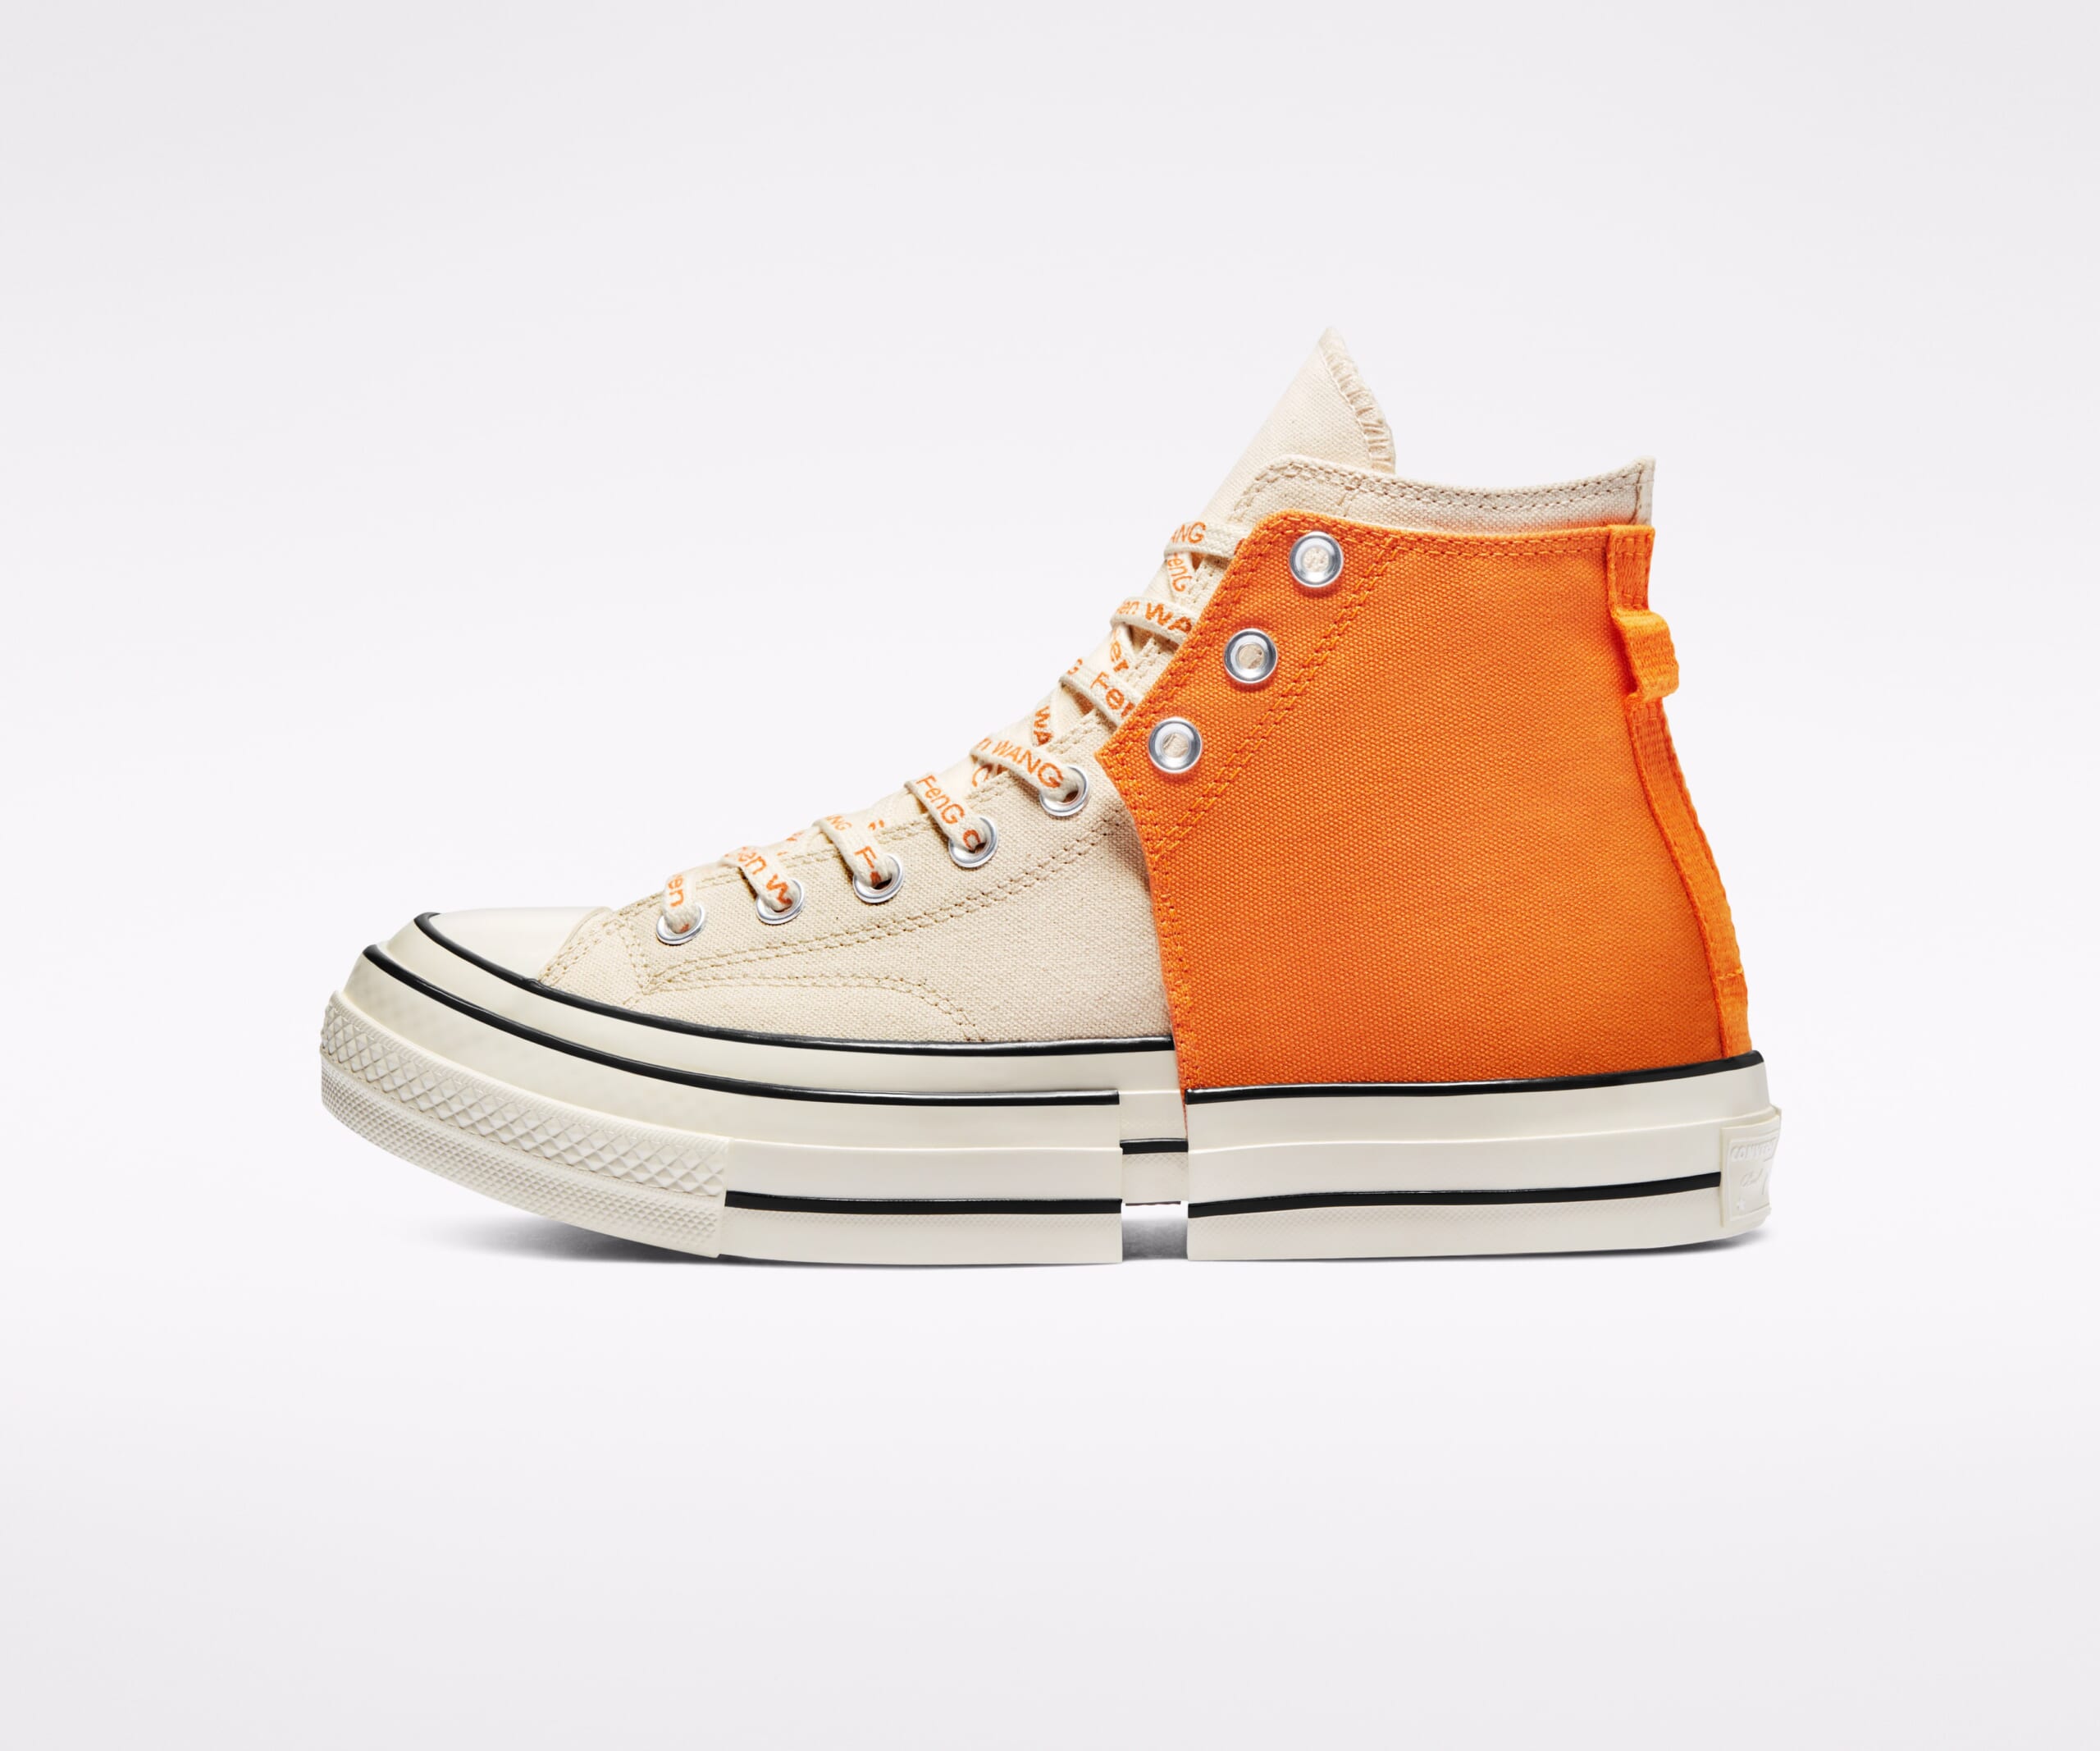 These Converse Limited Edition Chuck 70s Are 2 Sneakers in One - Maxim